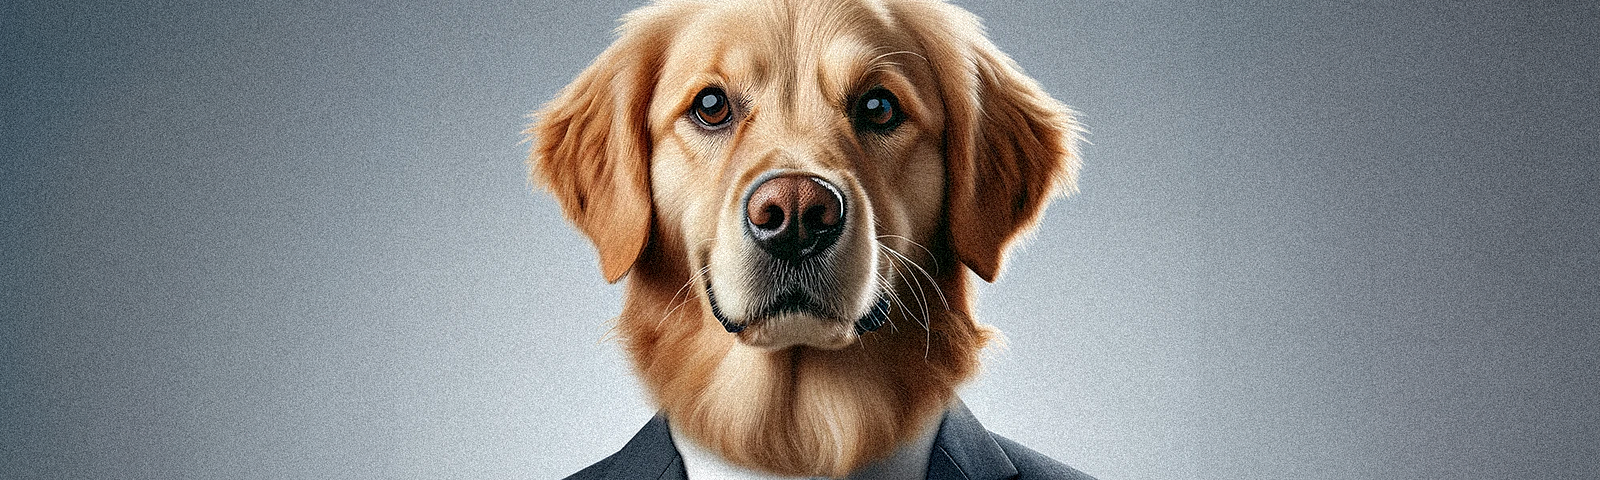 Business headshot of a dog in a suit